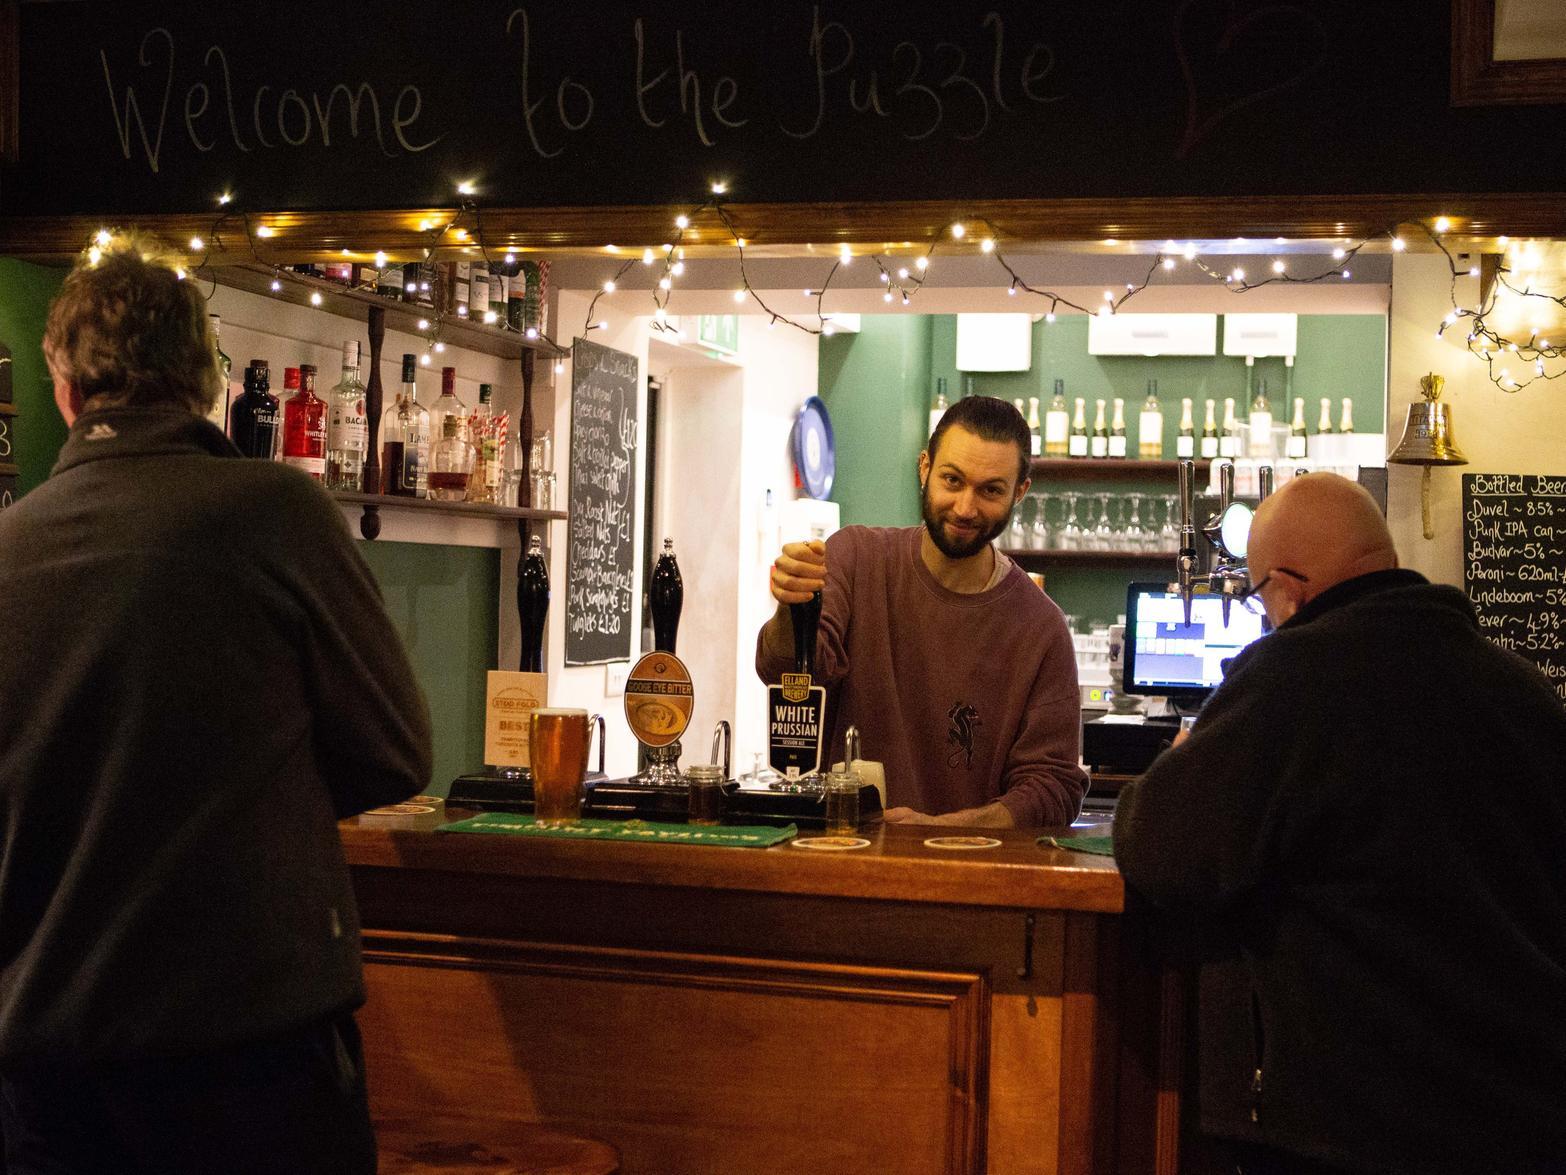 The pub's vision is for everyone in the community to 'Be A Piece of The Puzzle' and to support its sustainable success as an independent pub empowering local people.